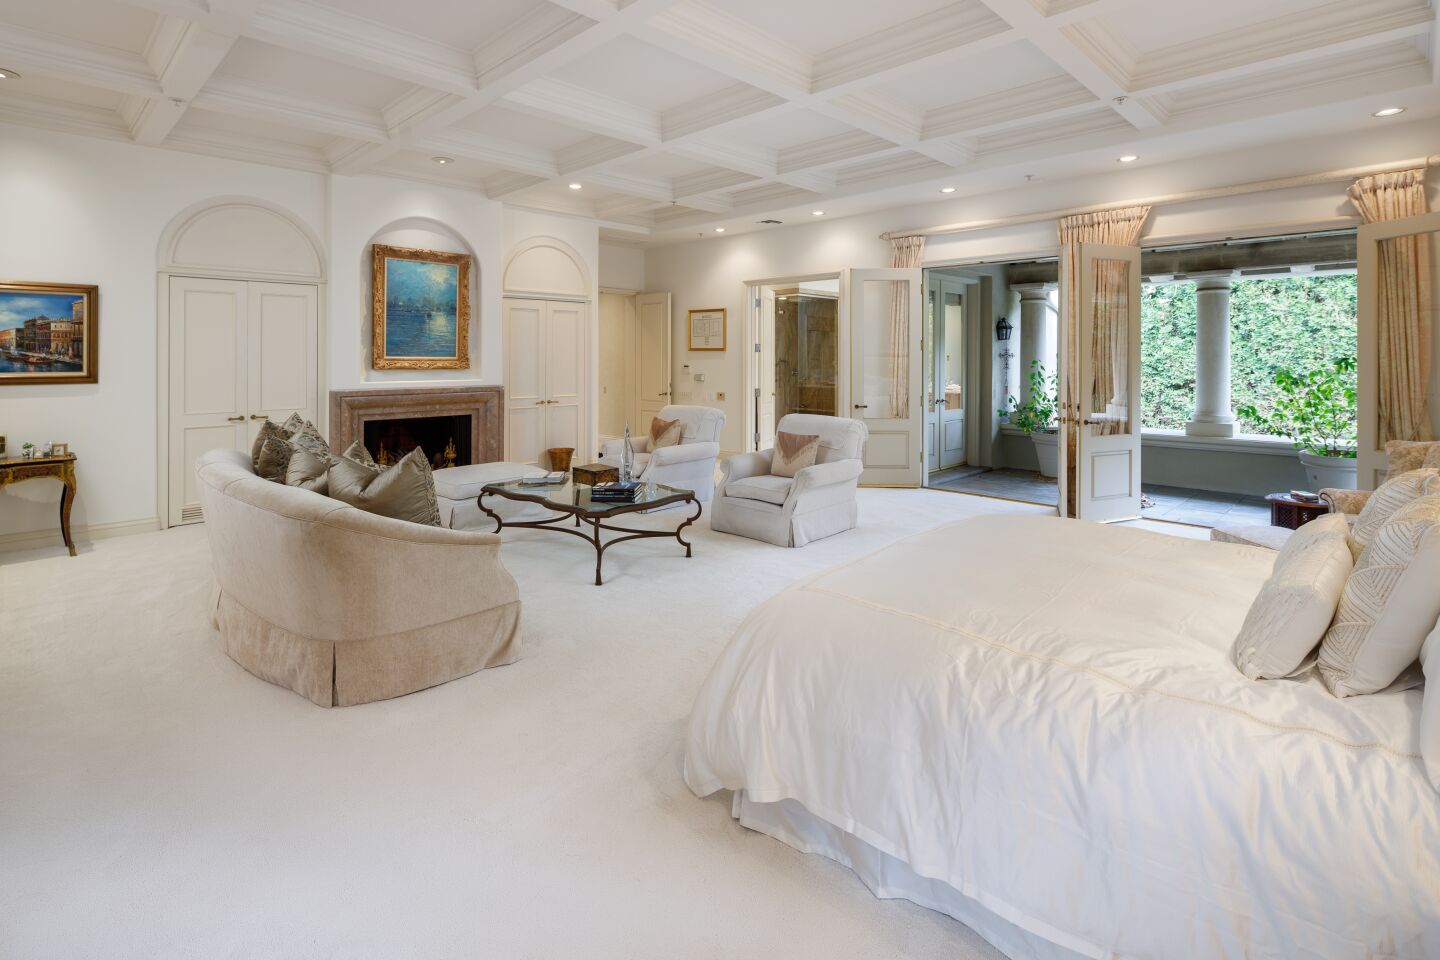 The master suite.